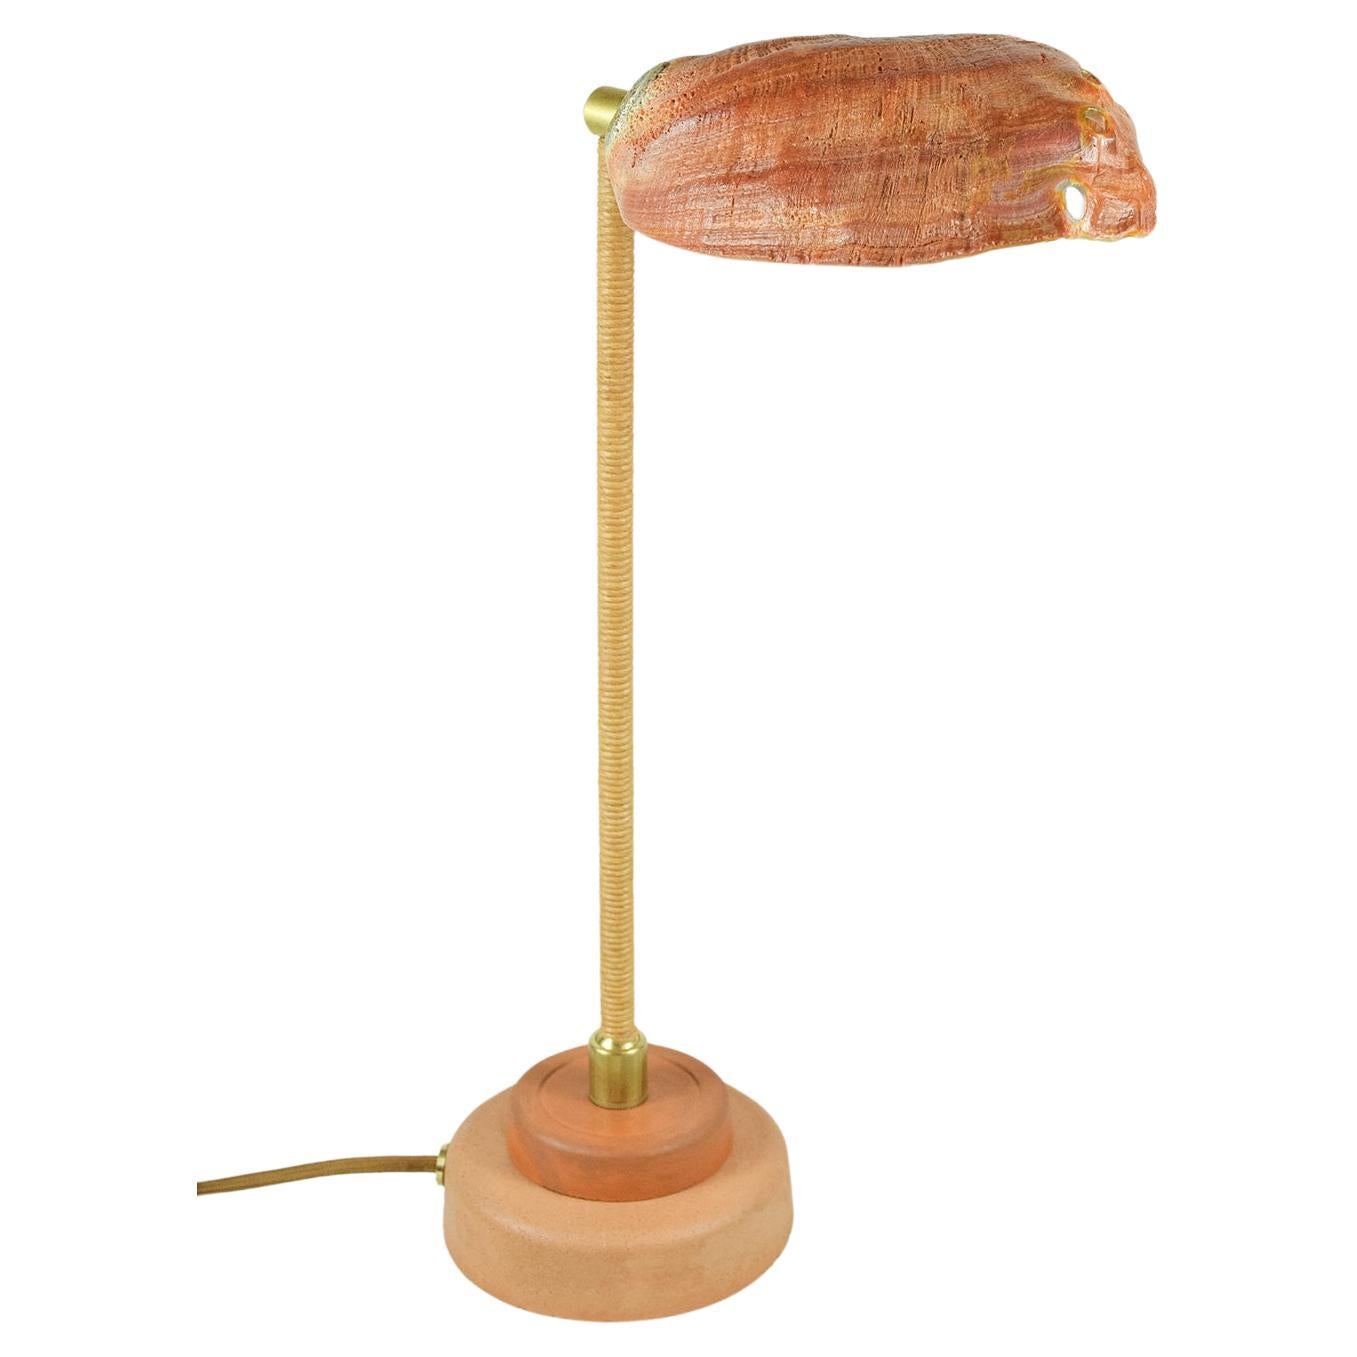 Modernist 'Abalone Lawyer's Lamp' with Real Vintage Abalone Seashell Shade For Sale